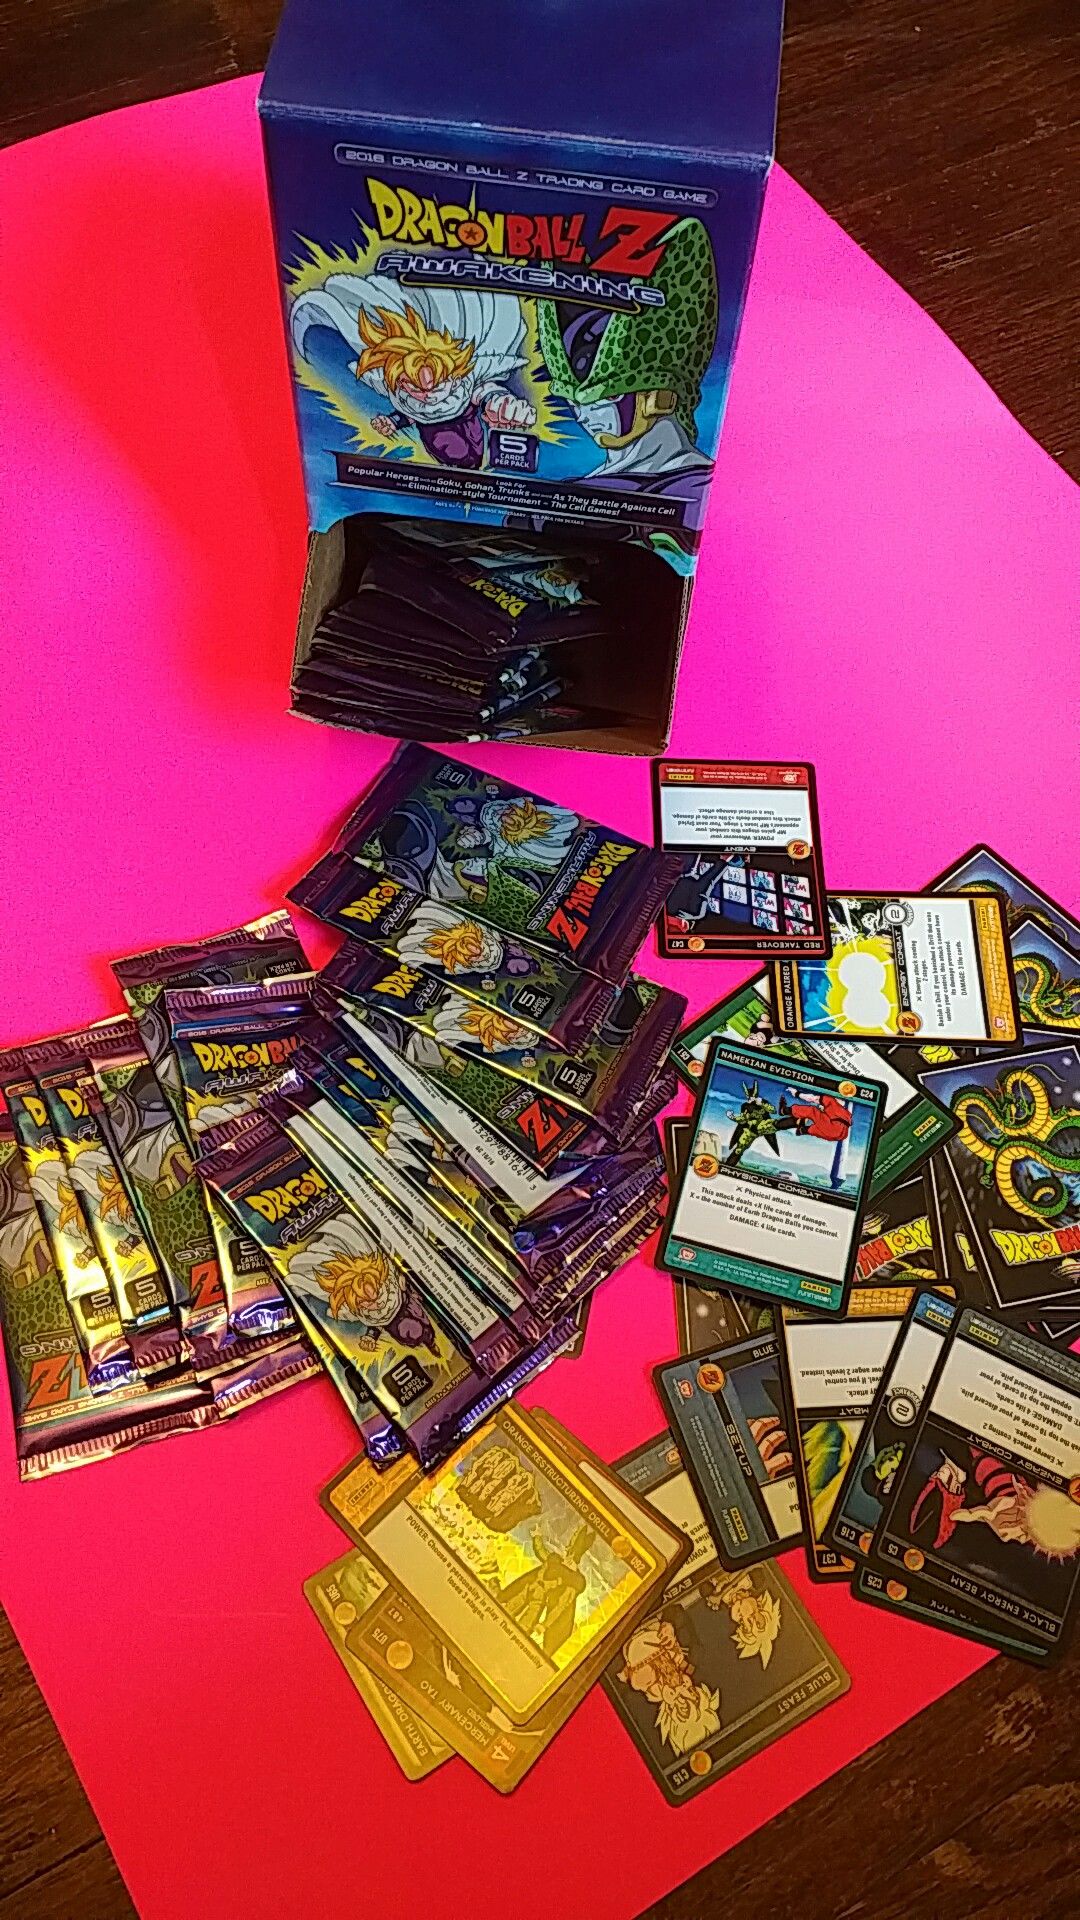 31 dragon ball z card packs. Loose ones and box included